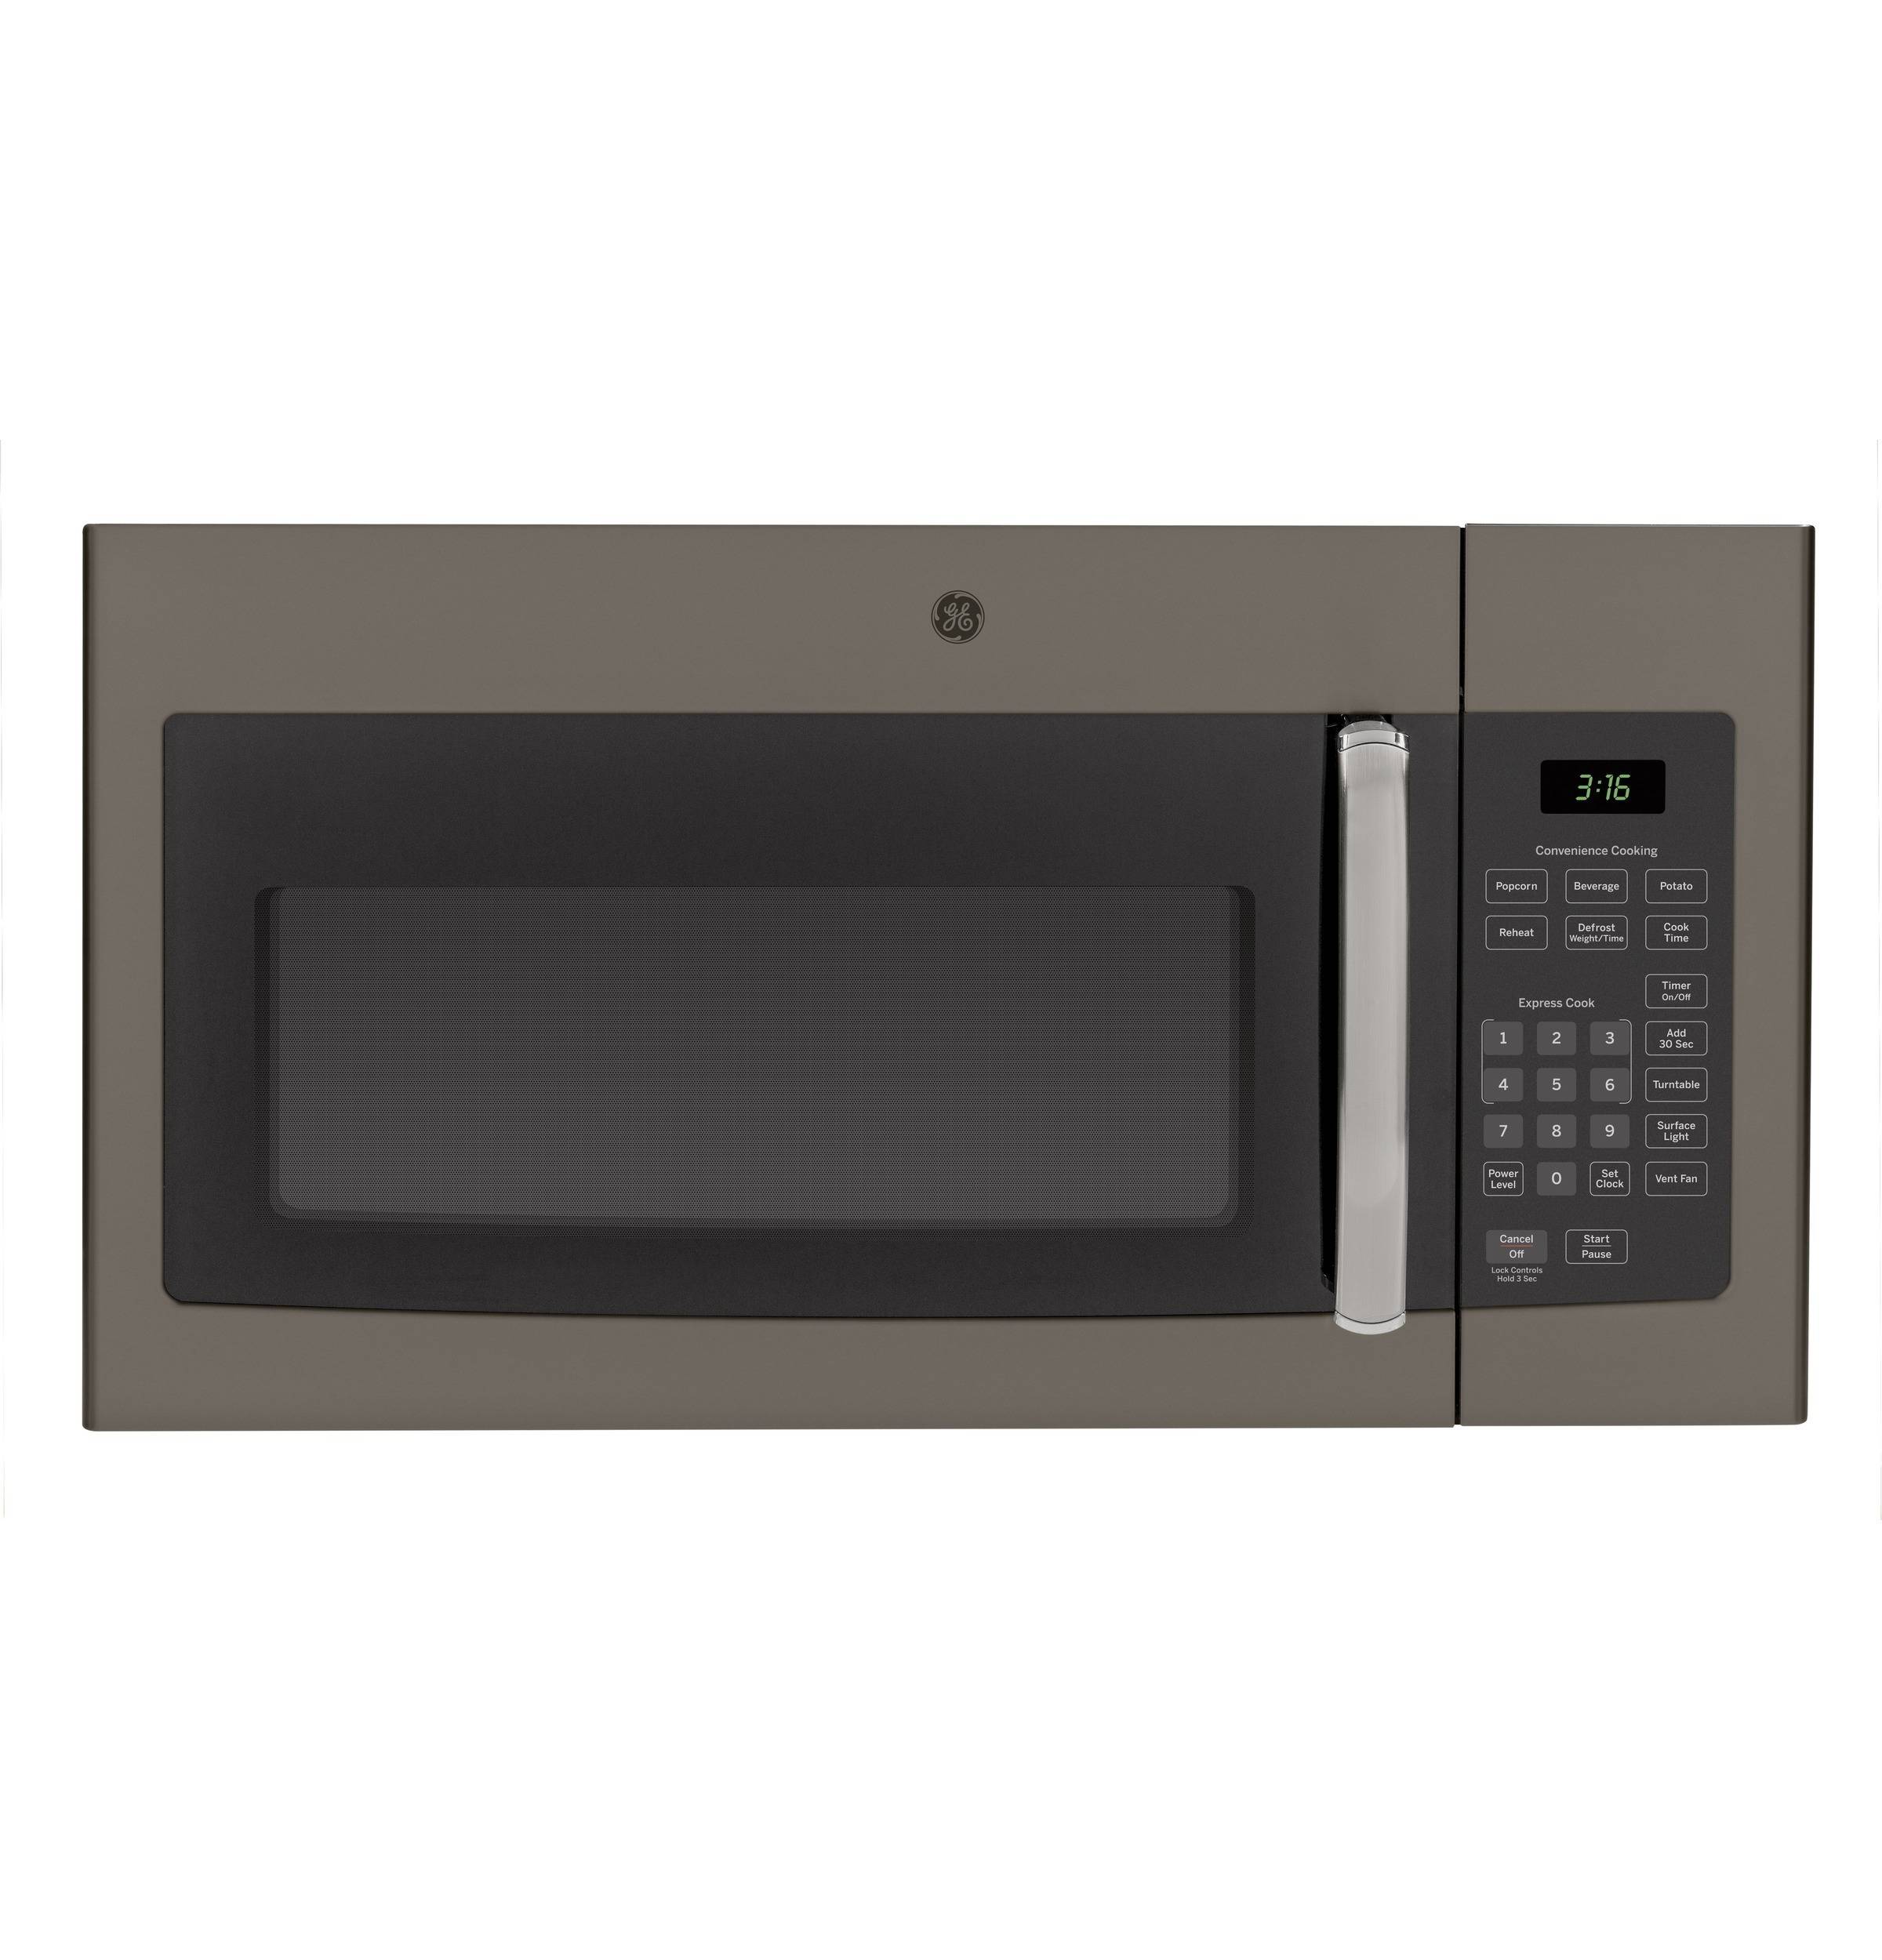 GE® 1.6 Cu. Ft. Over-the-Range Microwave Oven (Slate)